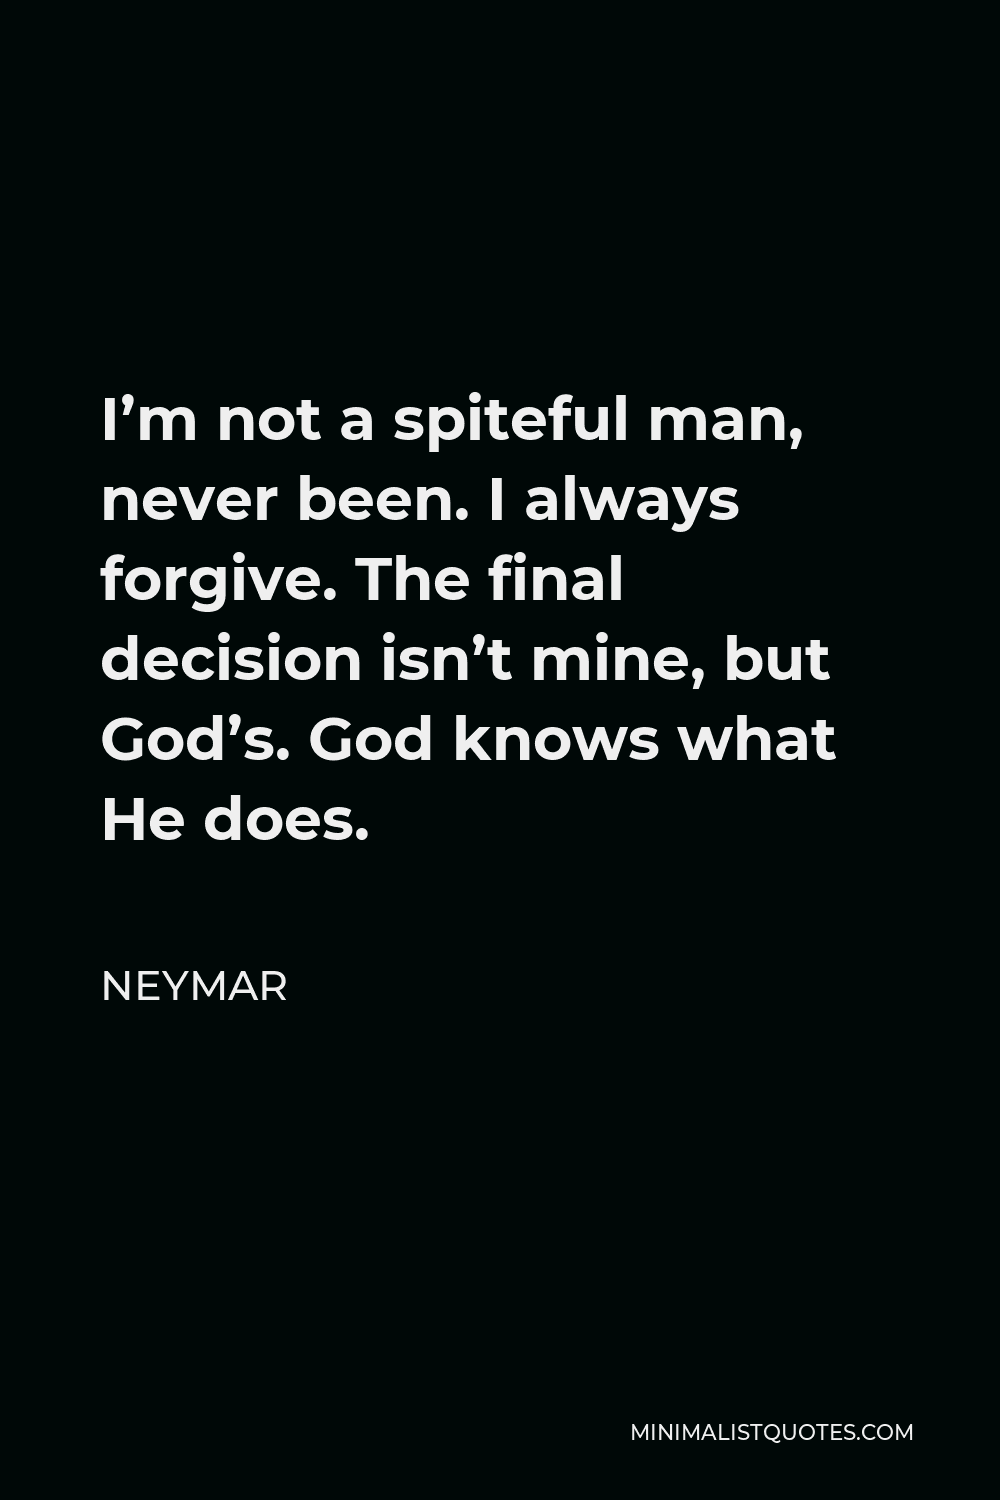 Neymar Quote - I’m not a spiteful man, never been. I always forgive. The final decision isn’t mine, but God’s. God knows what He does.